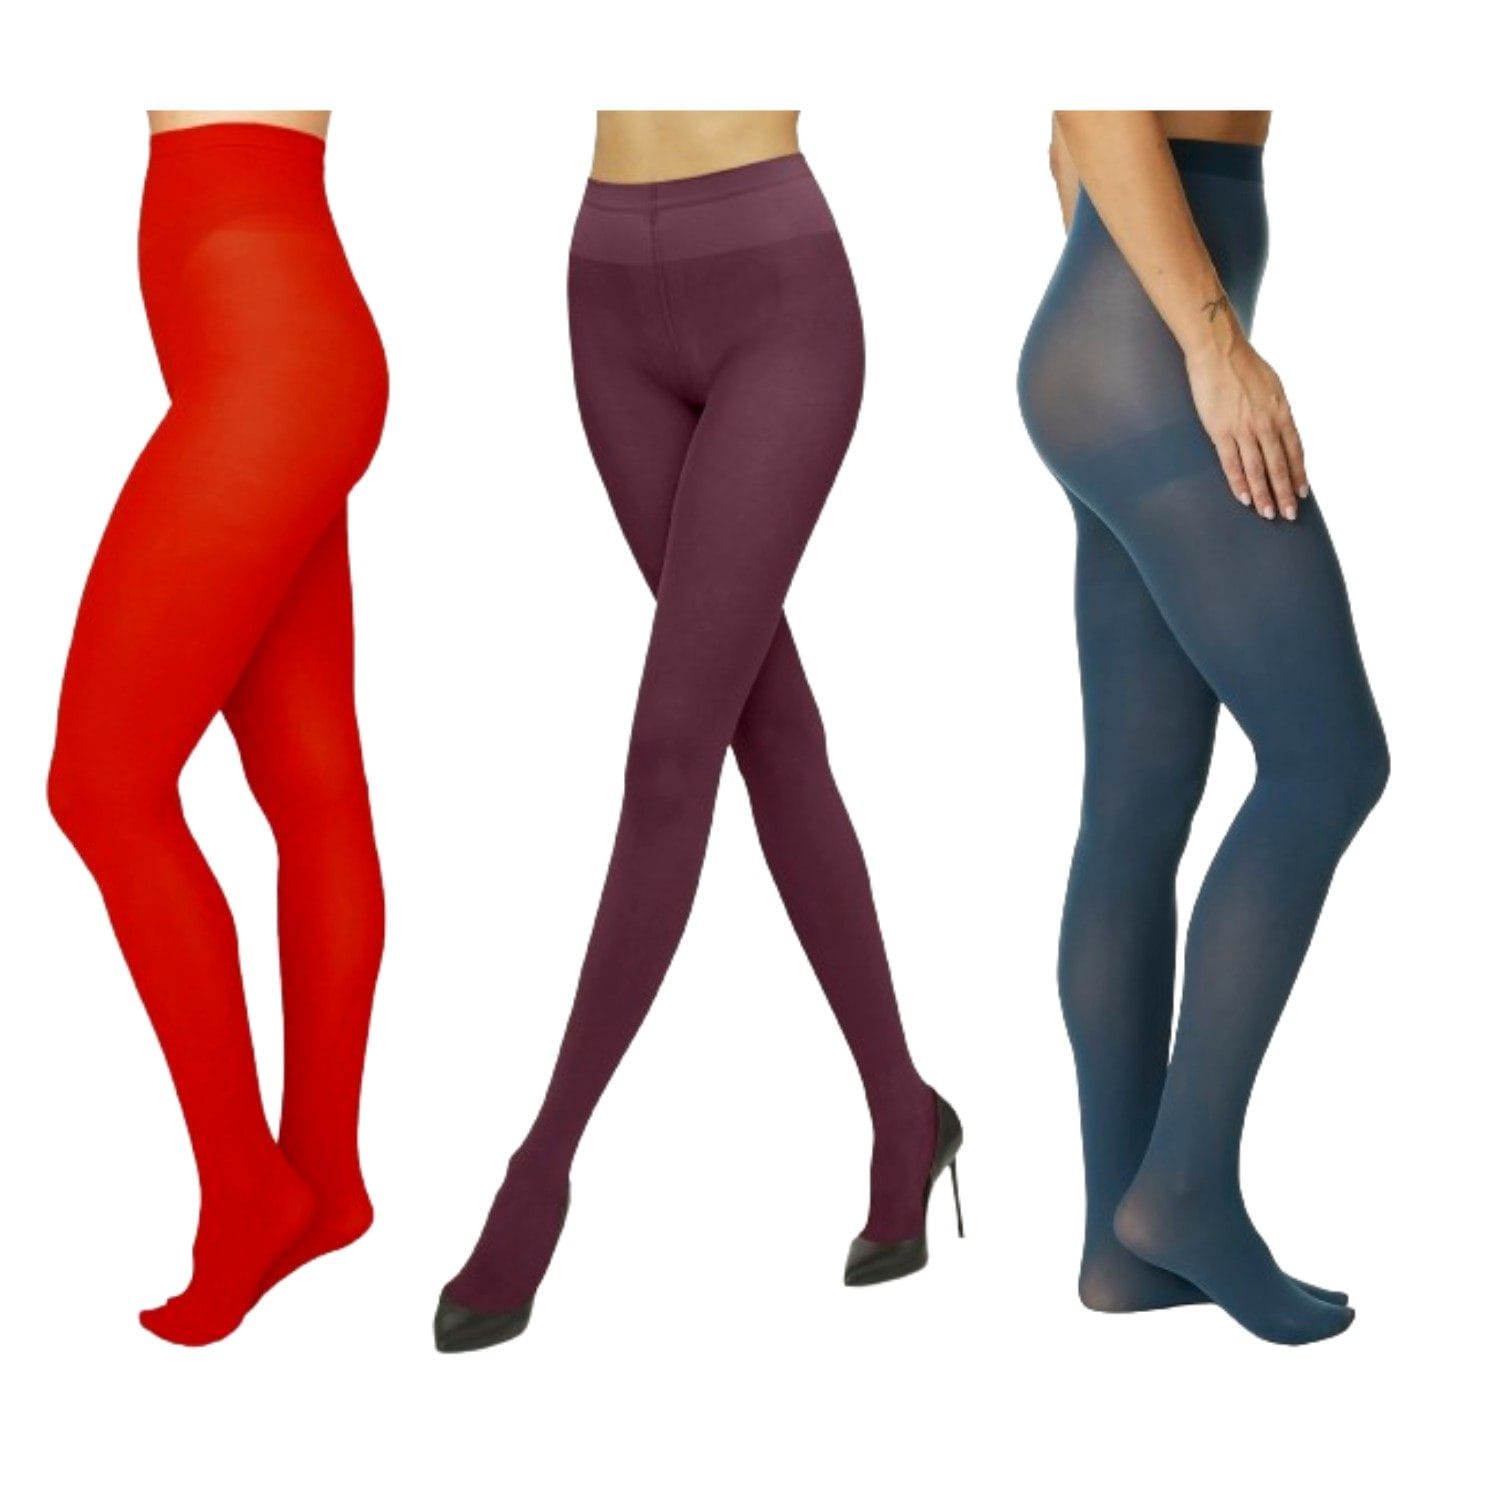 how to, the colourful tights revolution is upon us – here’s how to find the perfect pair